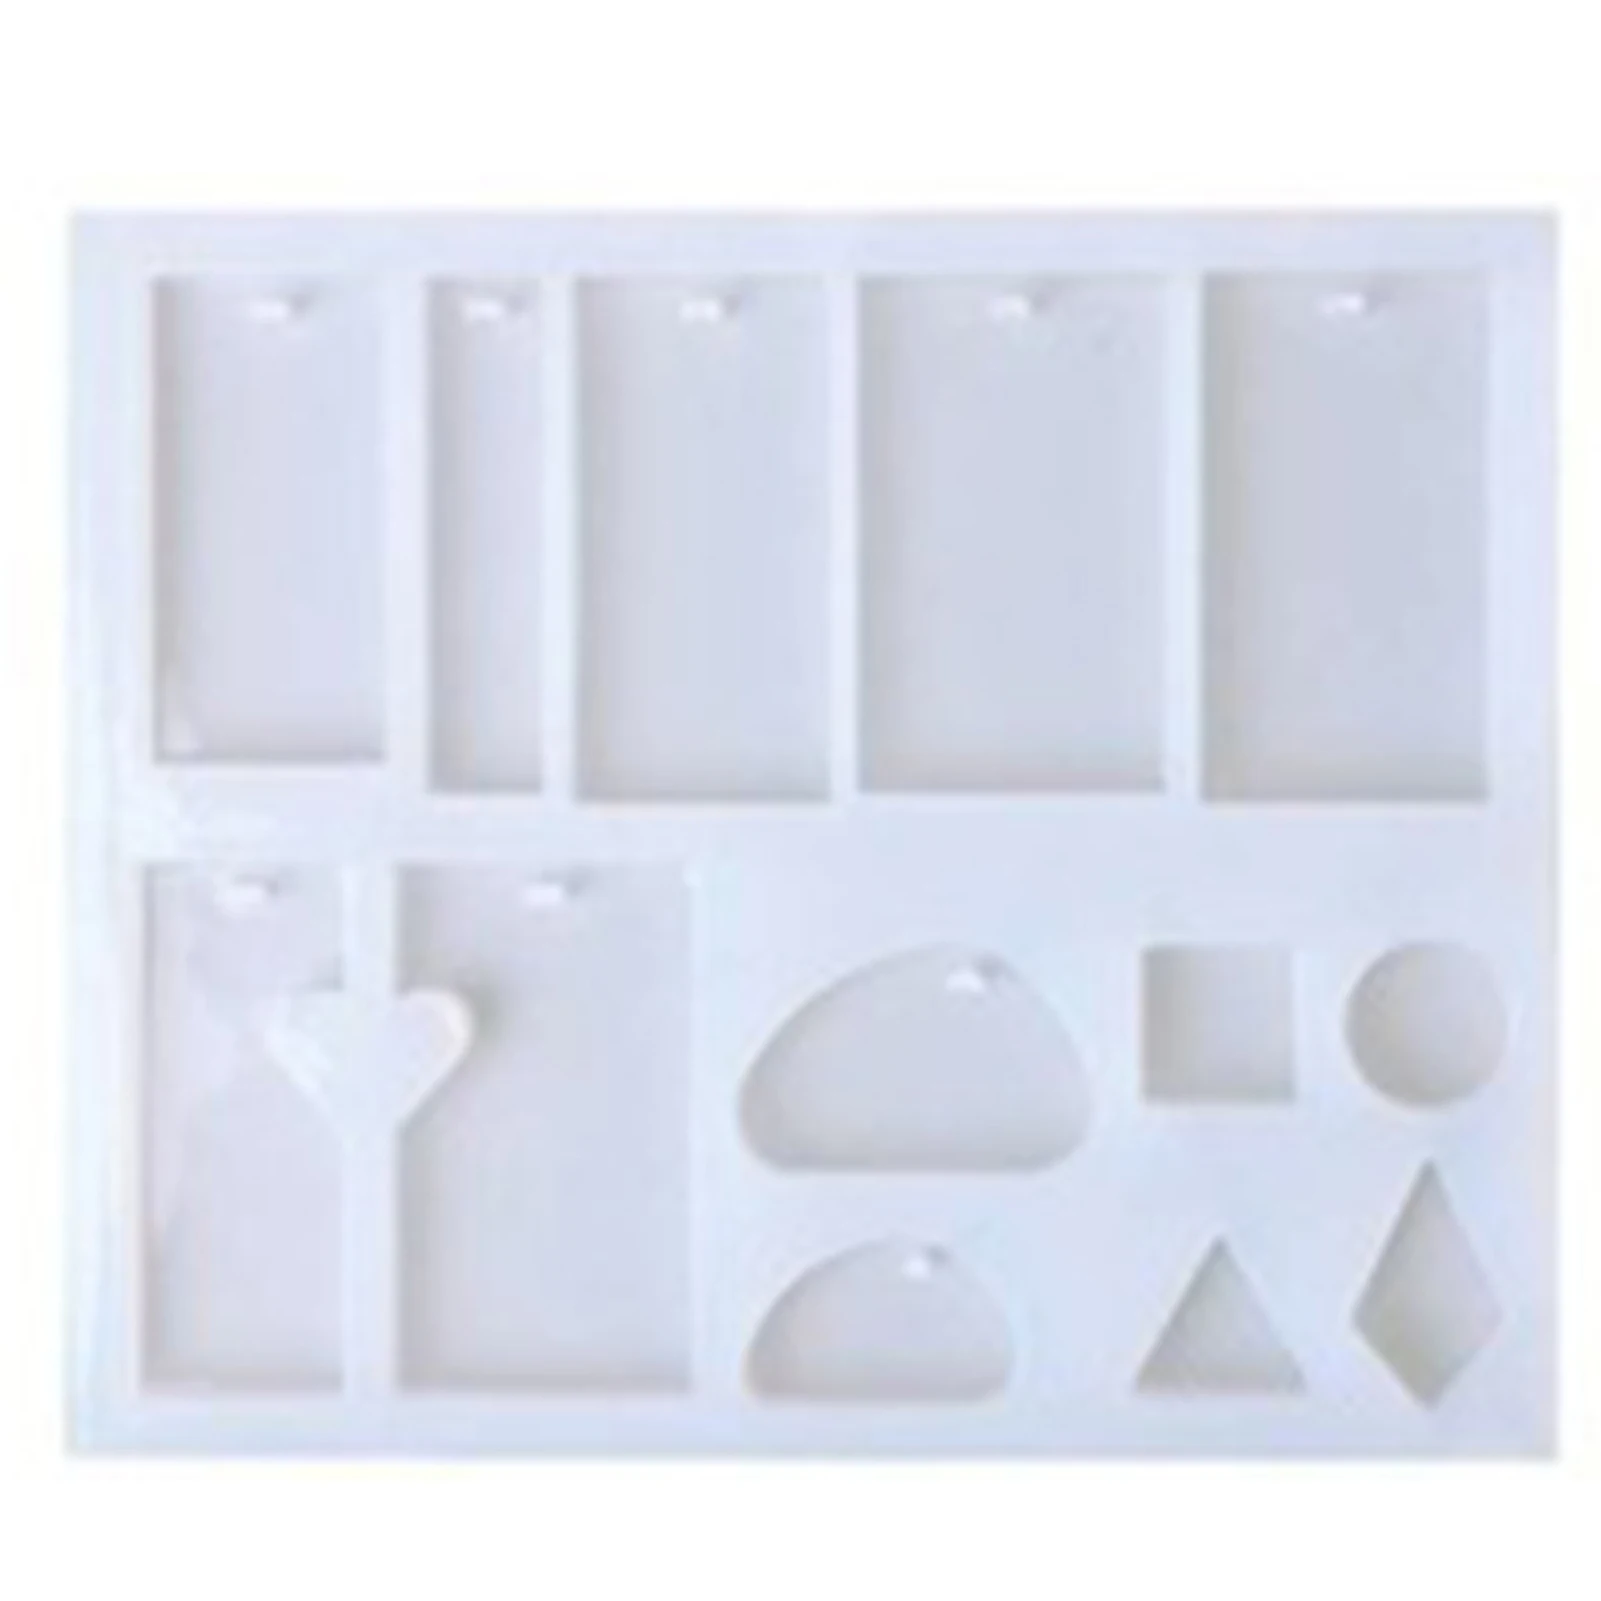 

Jewelry Casting Silicone Mold DIY Craft Making Tool Reusable Flexible Stencil for DIY Bracelet Jewellery Making